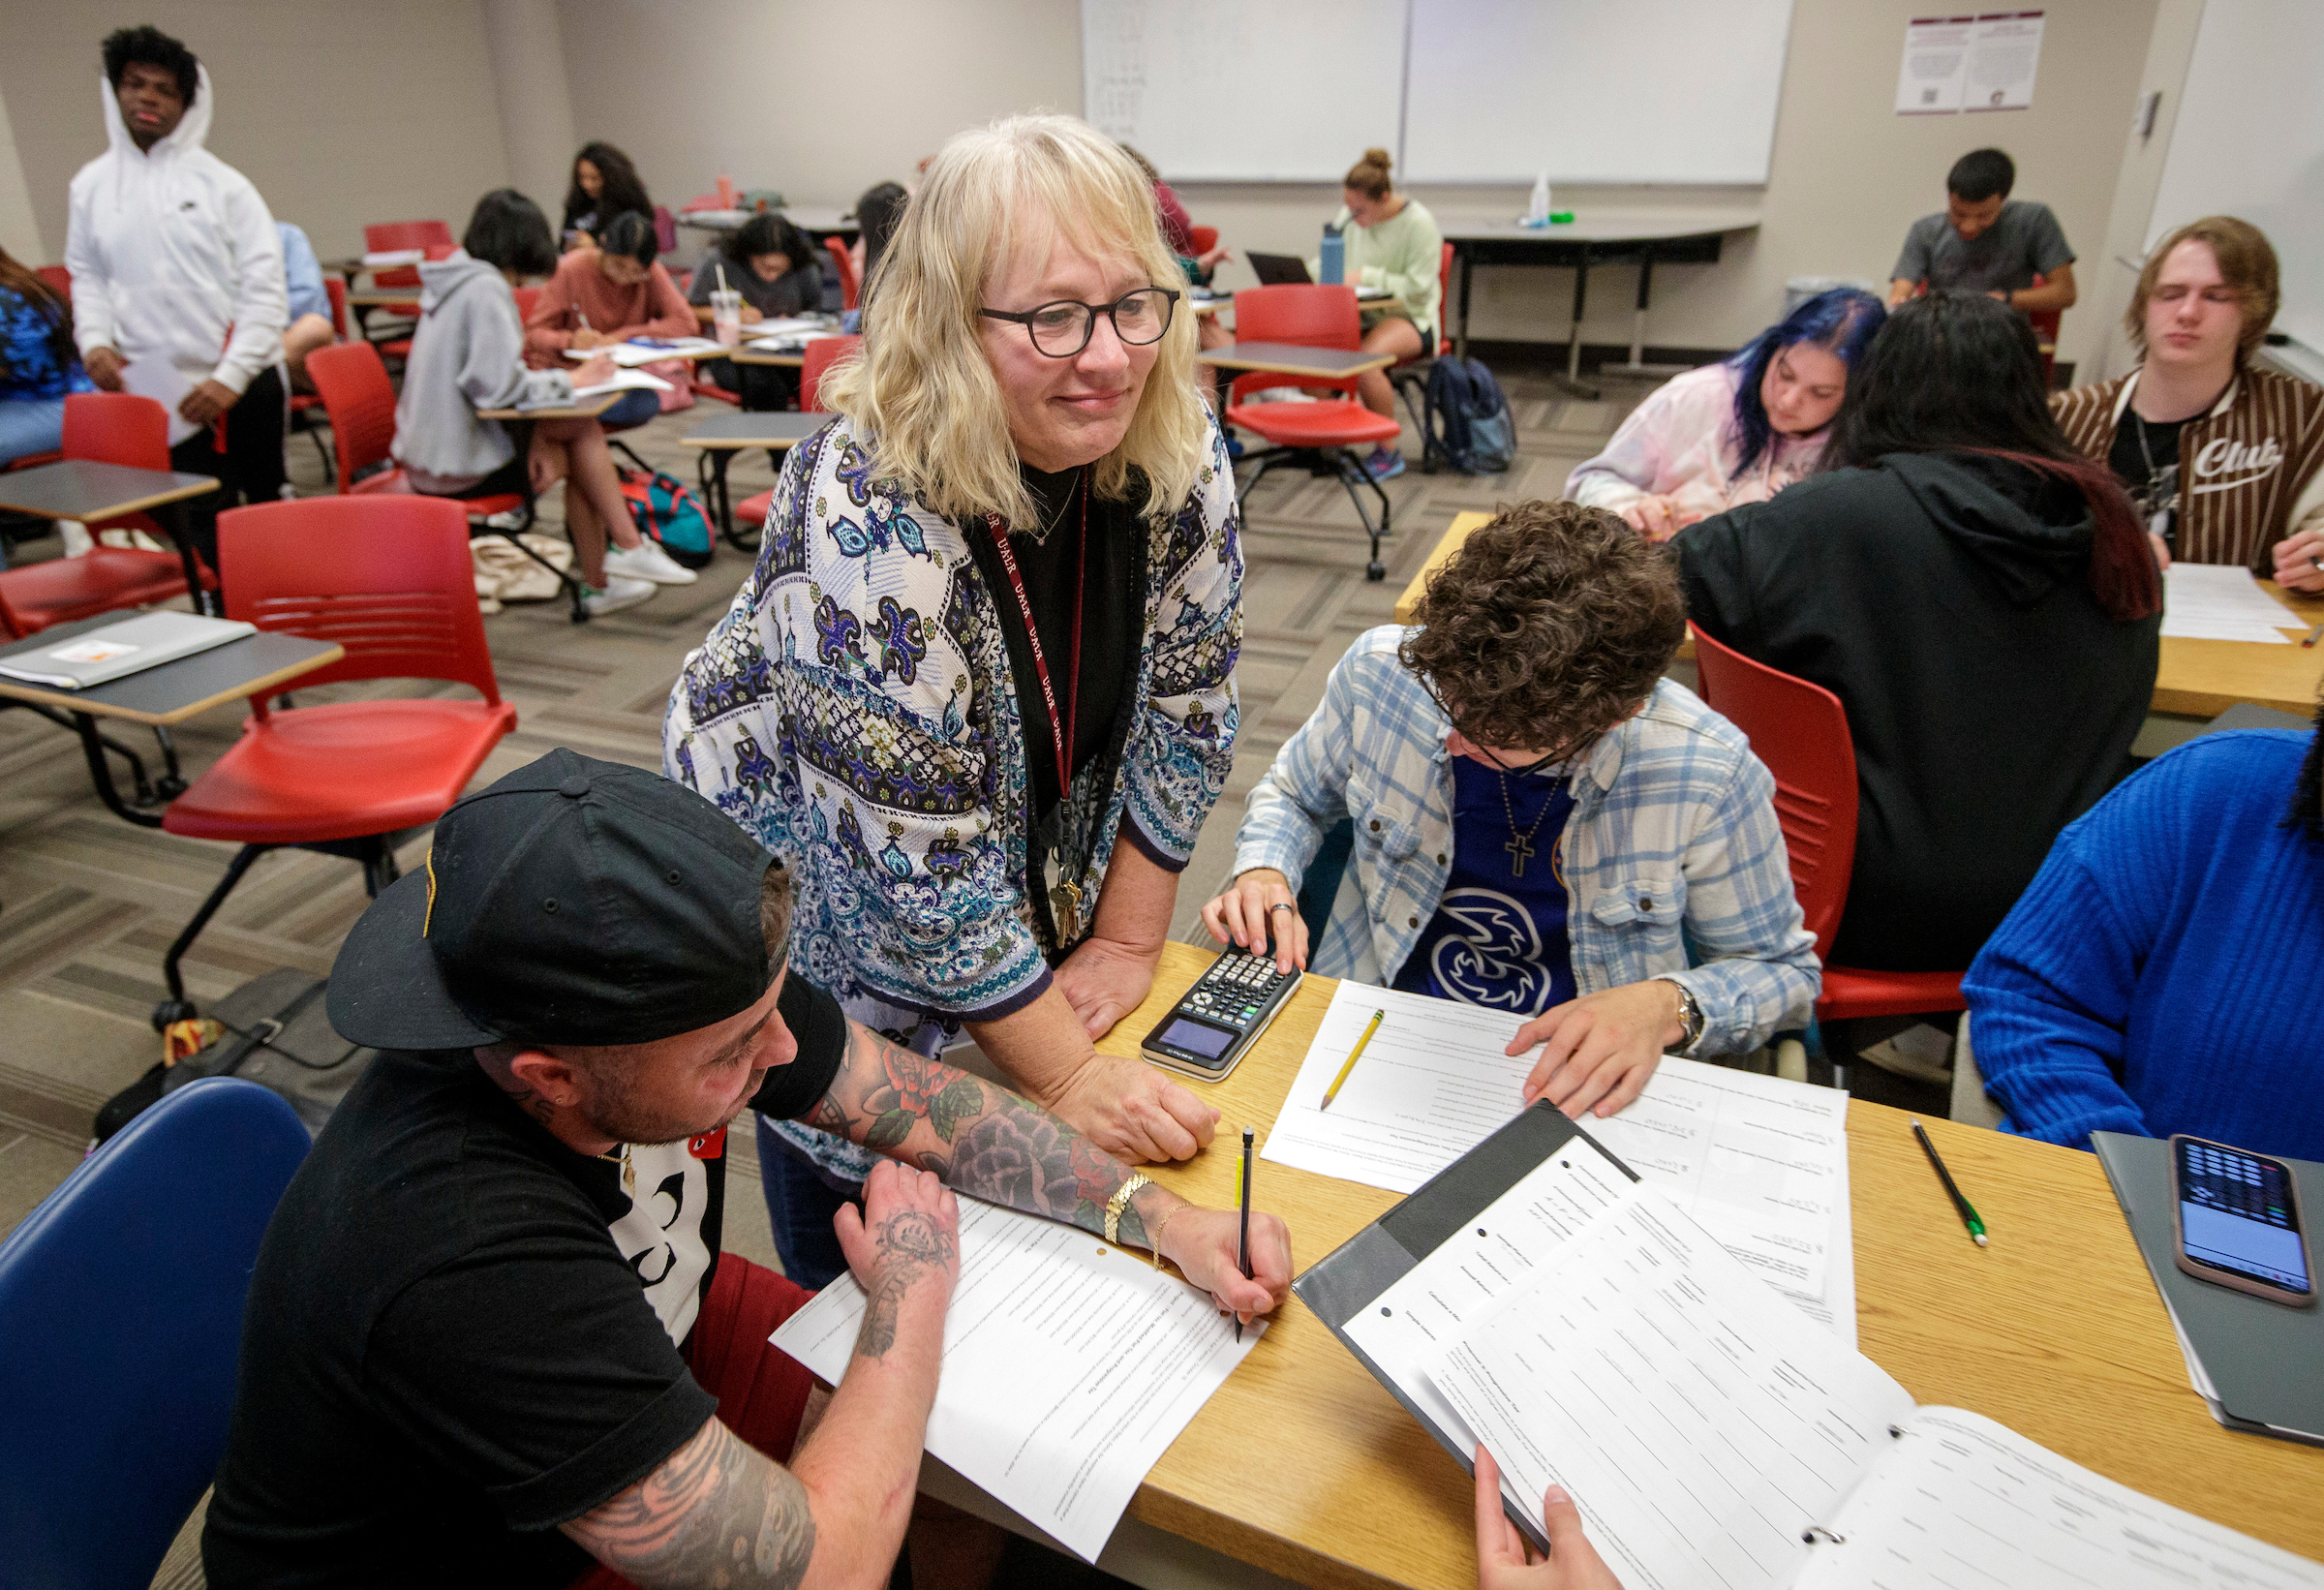 Melissa Hardeman, a senior instructor in the Department of Mathematics and Statistics, works with math students in the classroom. Photo by Ben Krain.